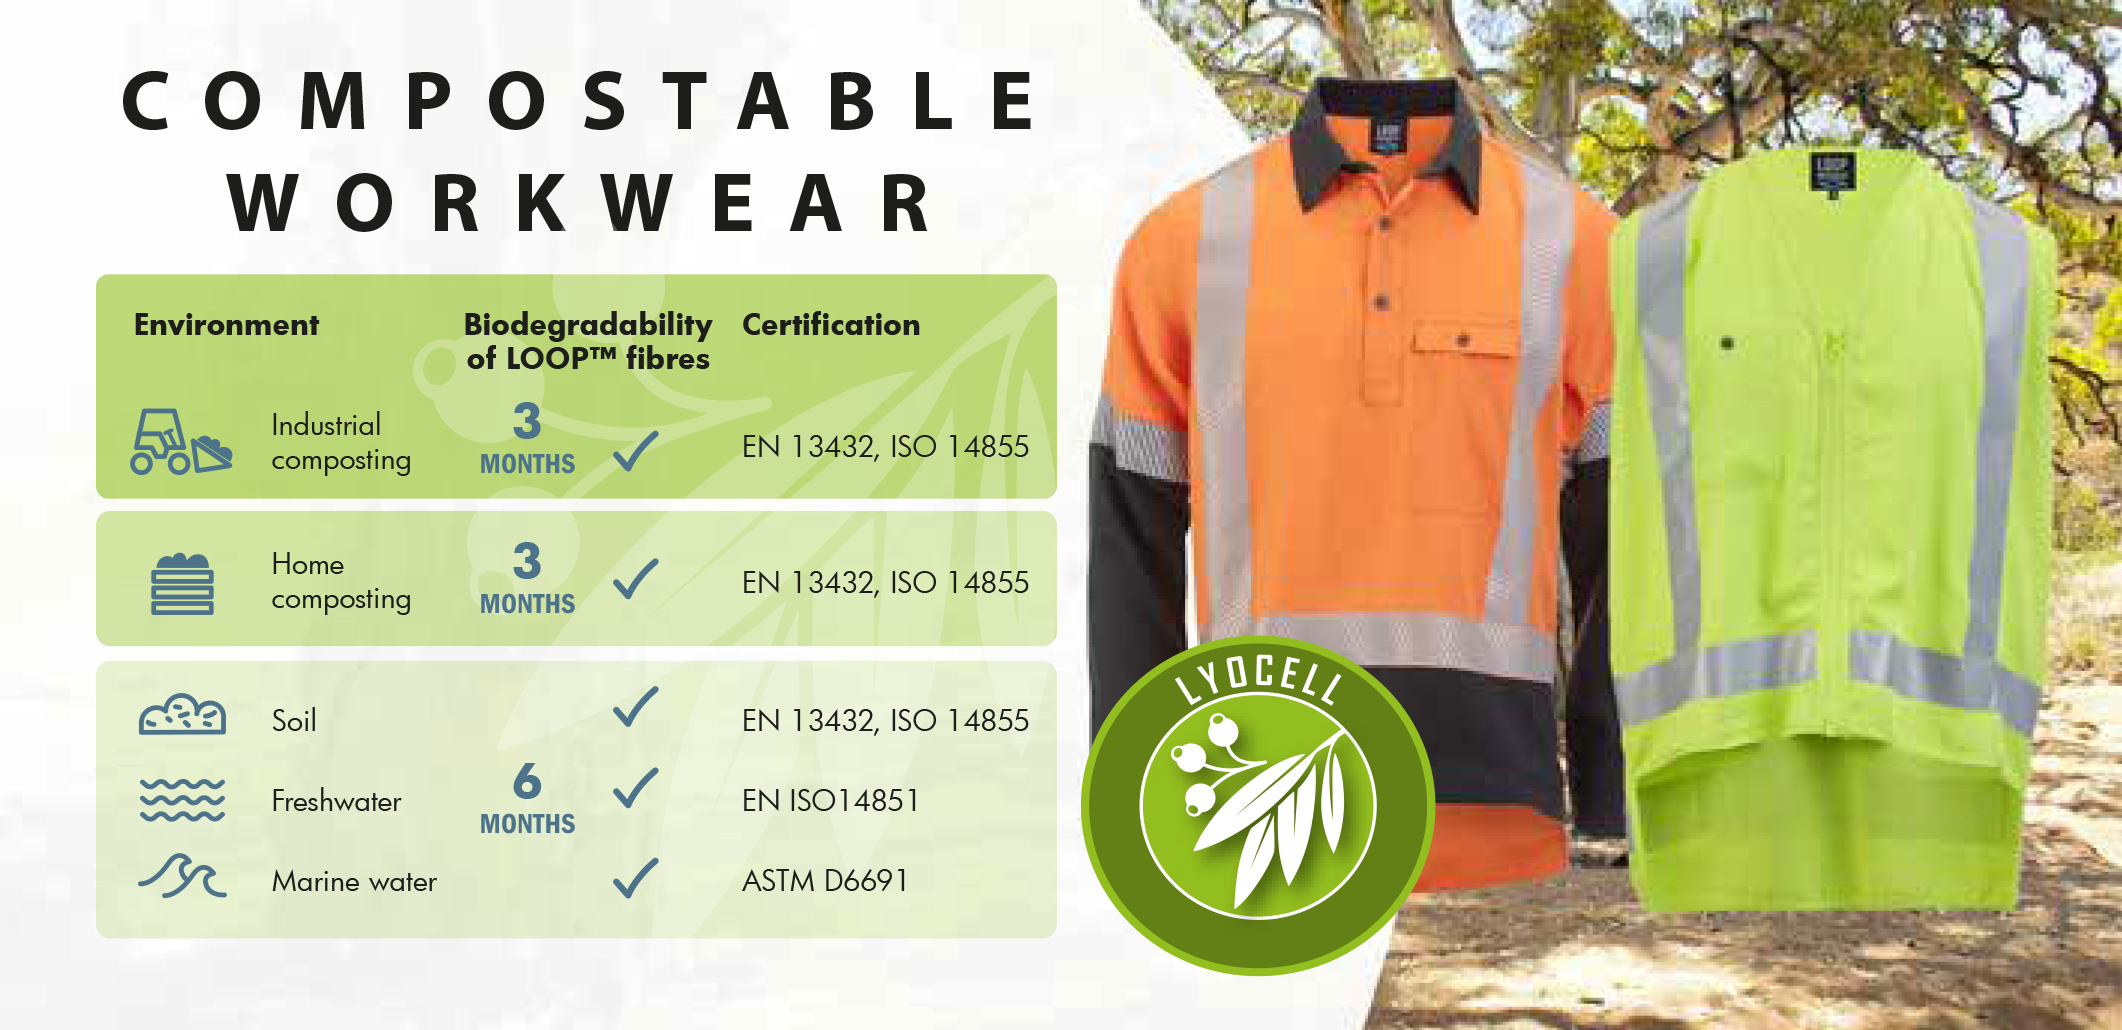 compostable workwear in New Zealand